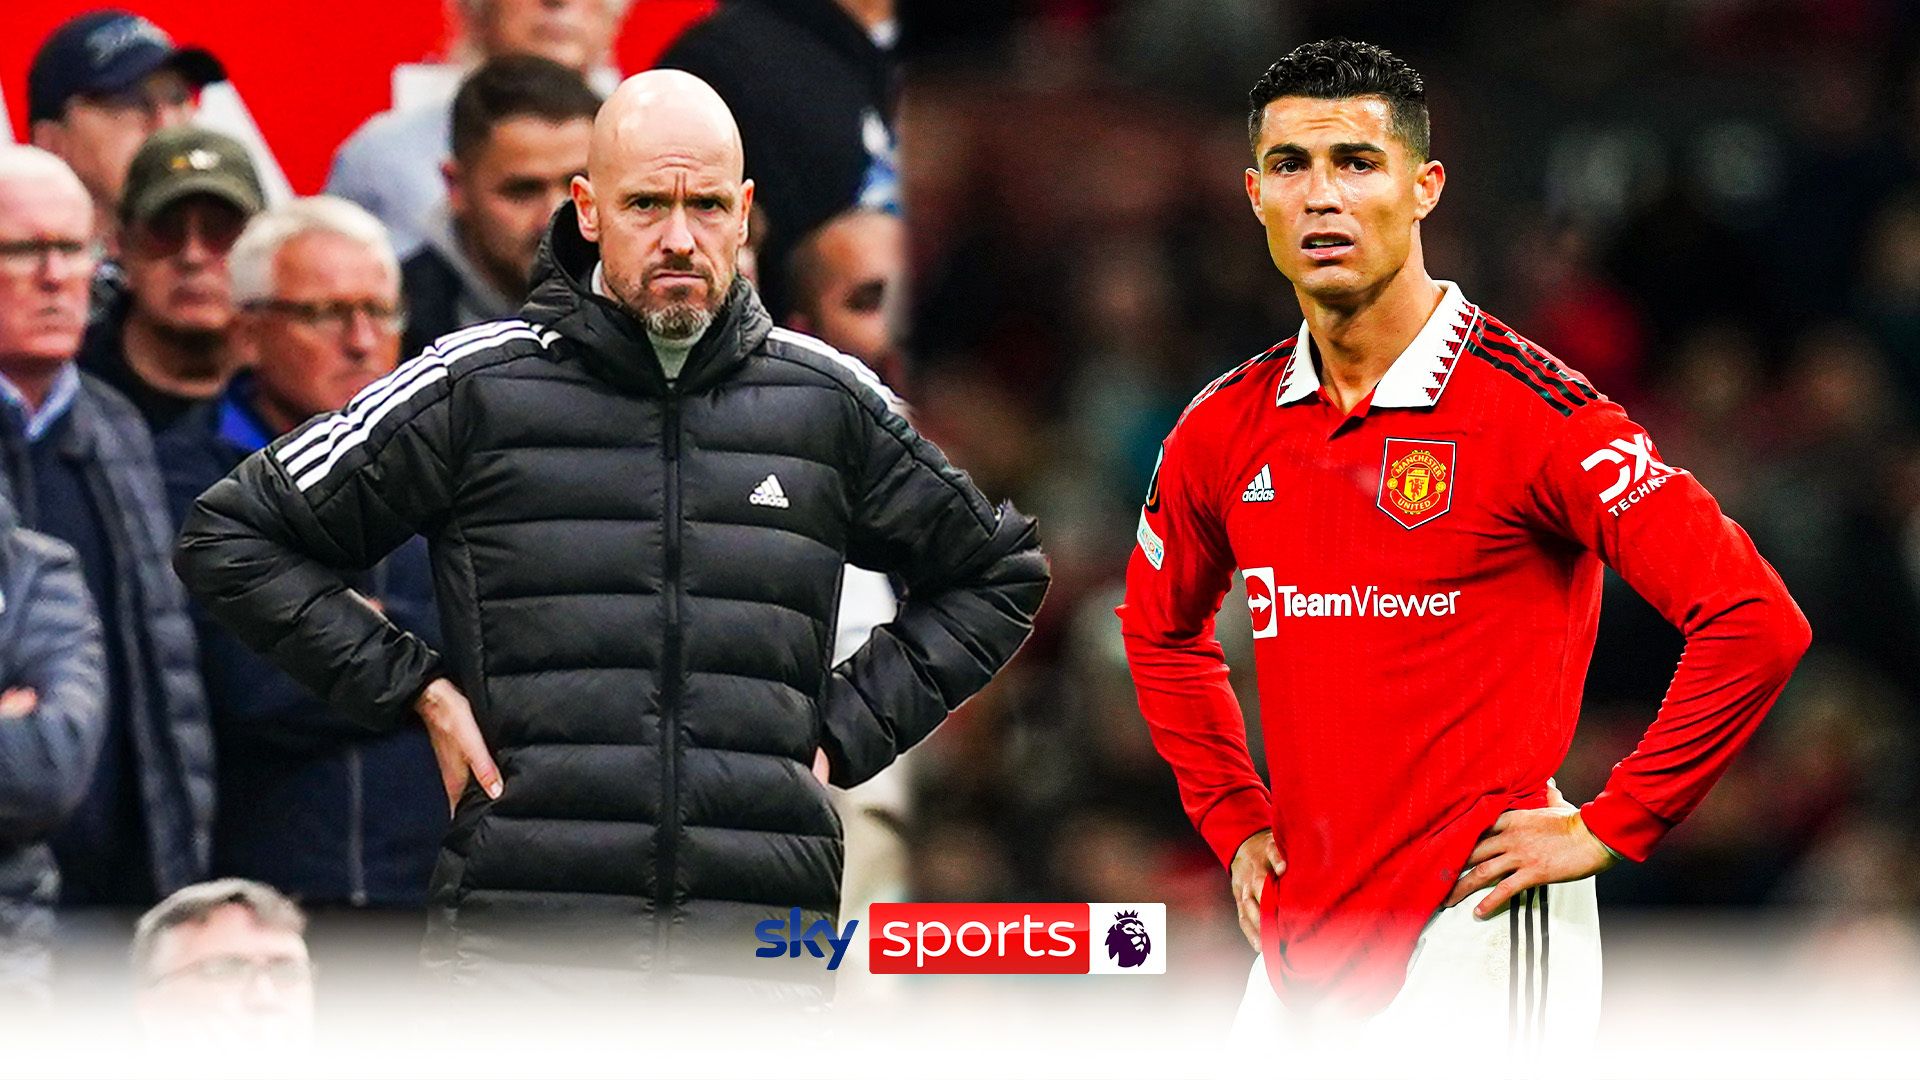 Ten Hag expects Ronaldo to stay at Man Utd | 'I count on him'